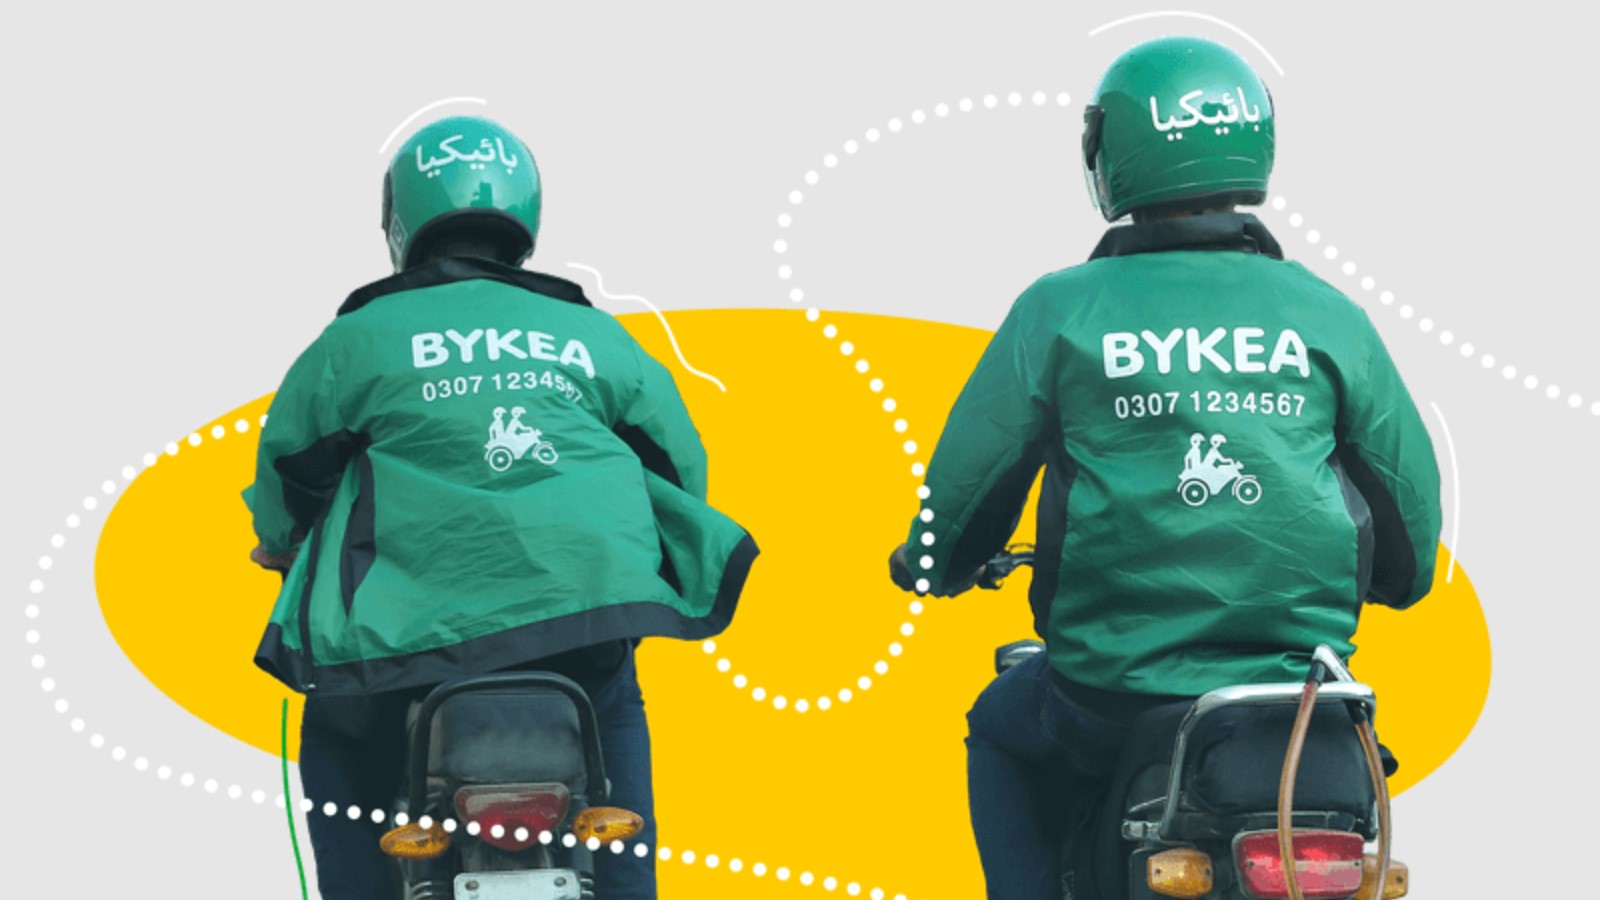 ride-hailing-firm-bykea-leaked-out-sensitive-data-of-drivers-and